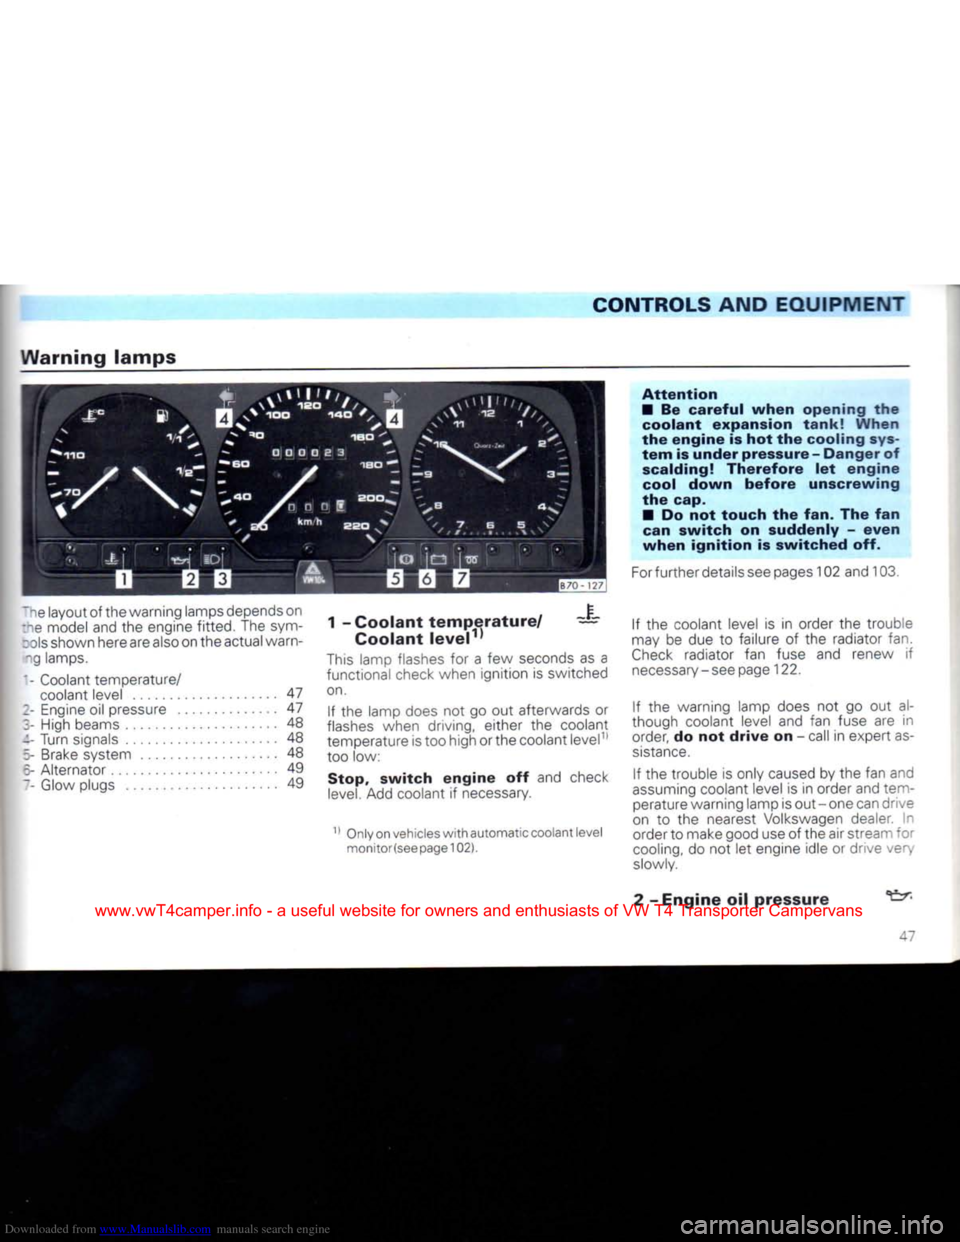 VOLKSWAGEN TRANSPORTER 1992 T4 / 4.G User Guide Downloaded from www.Manualslib.com manuals search engine 
CONTROLS
 AND
 EQUIPMENT 

Warning
 lamps 

~ne layout of the warning lamps depends on 
:ne model and the engine fitted. The sym-
: ols shown 